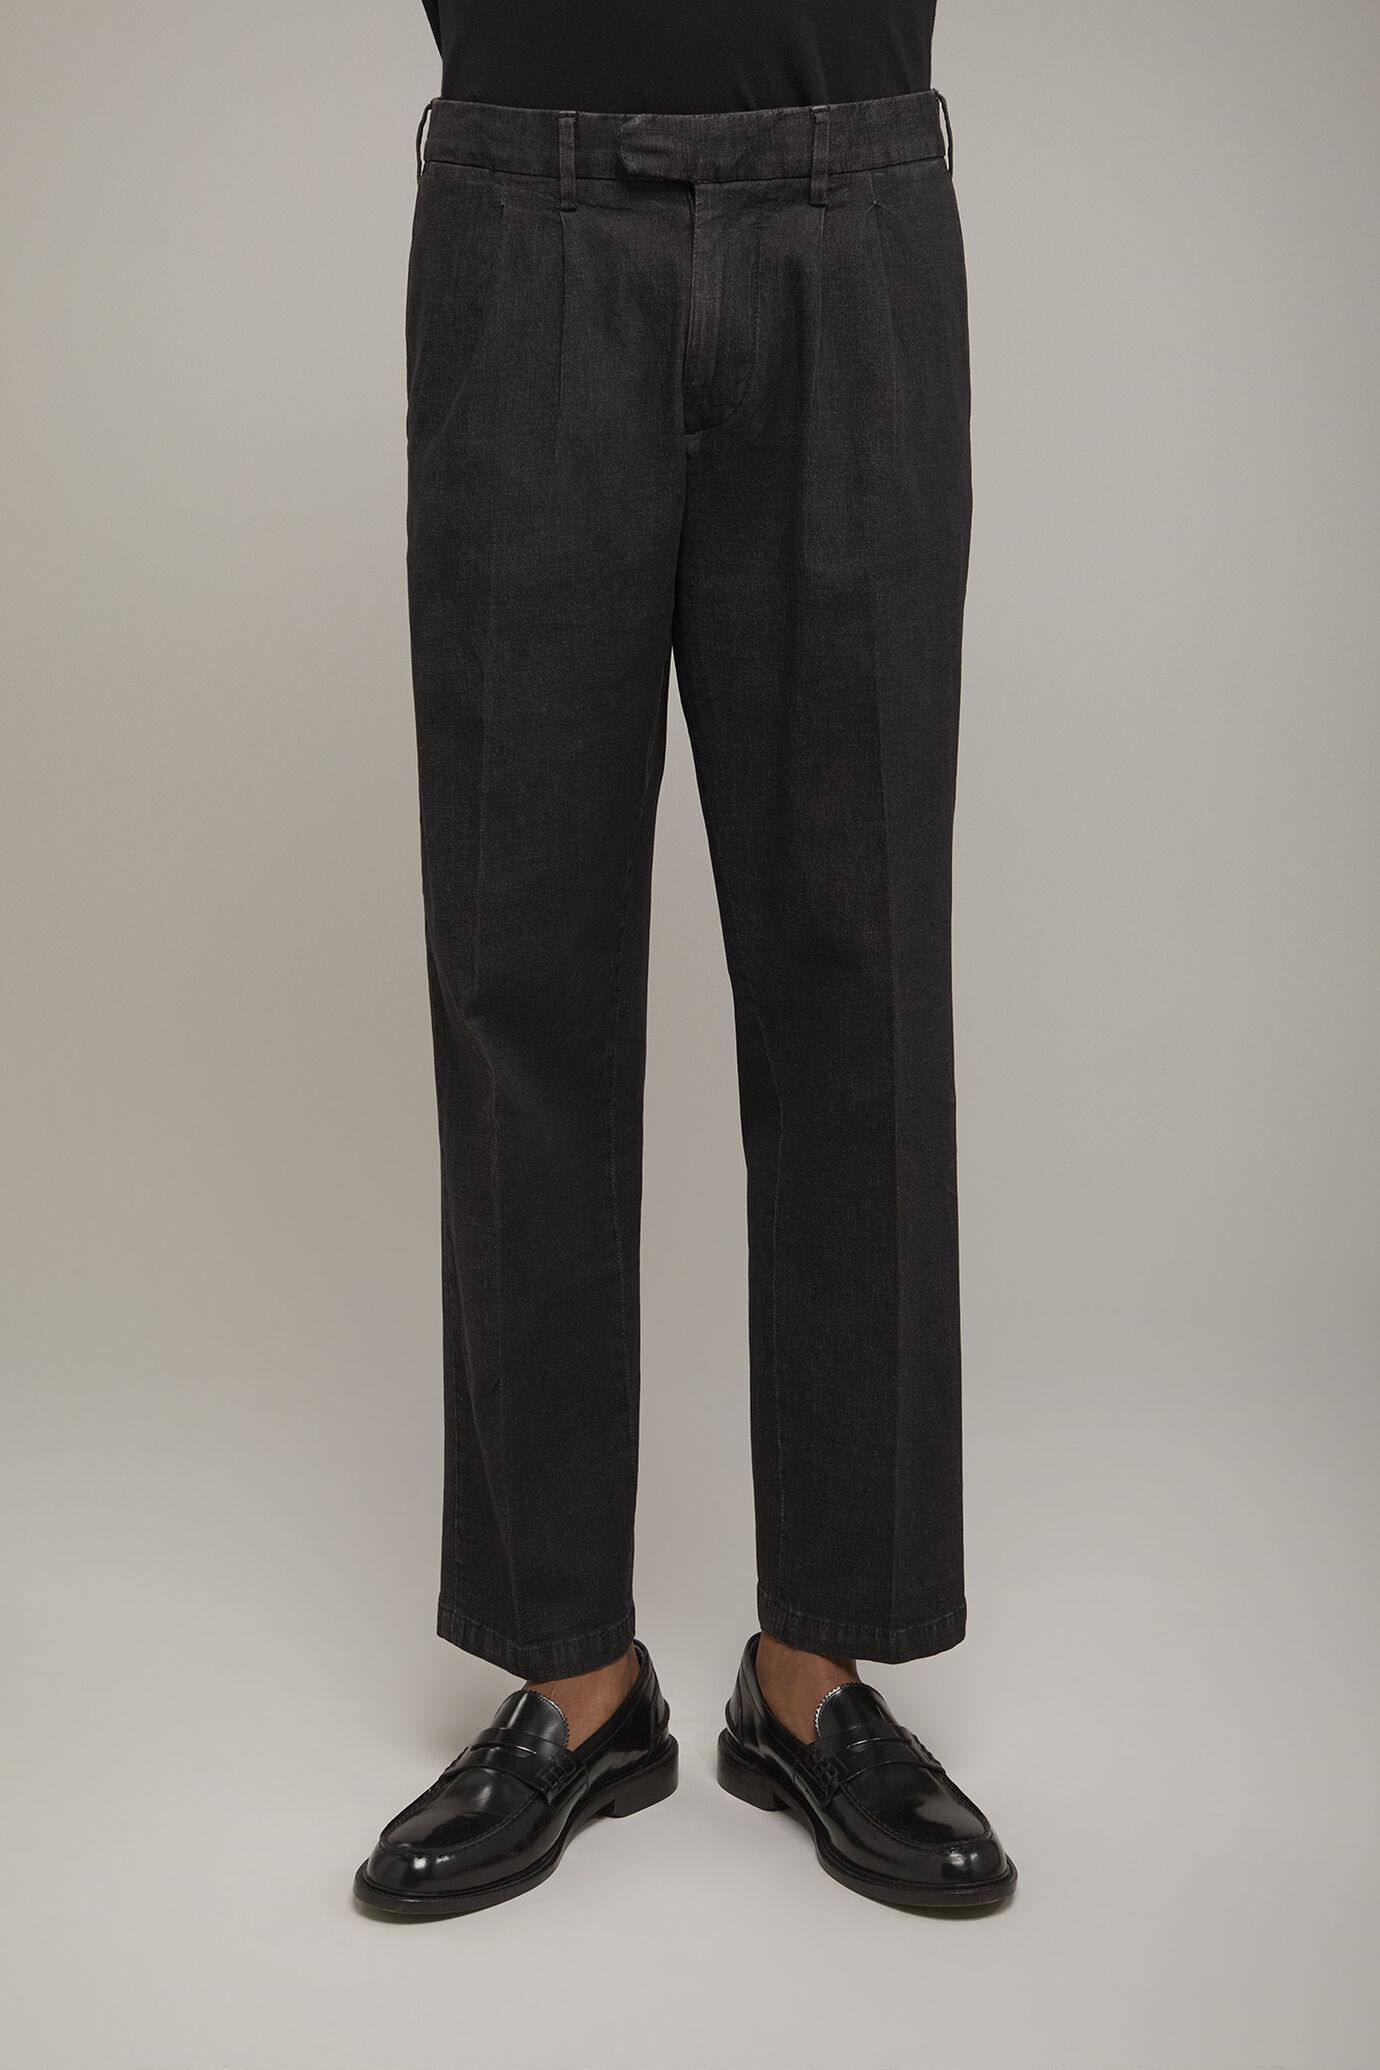 Men's technical trousers with double pinces light comfort fit denim fabric image number 3